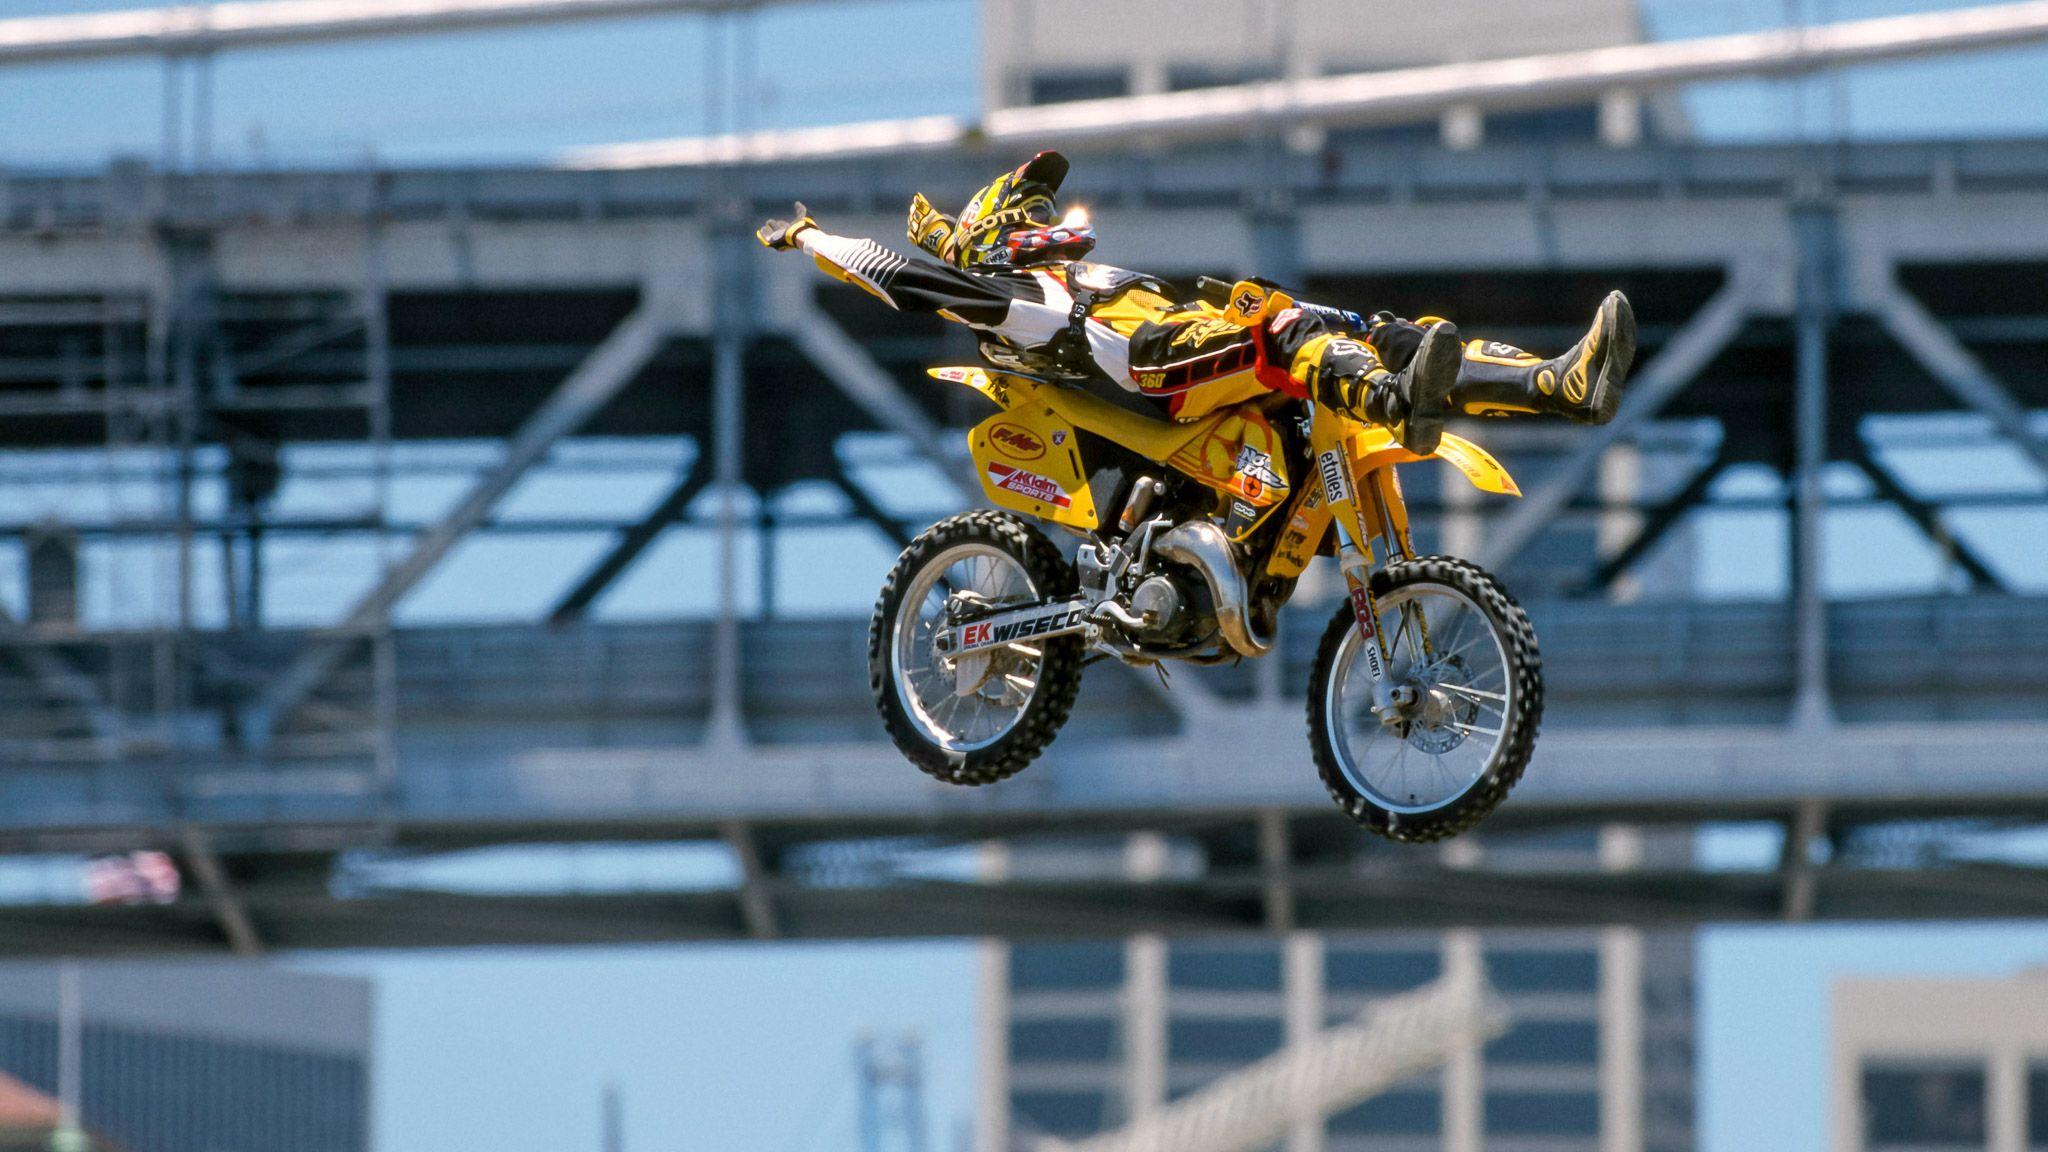 Being Travis Pastrana Greatest Of All Time?